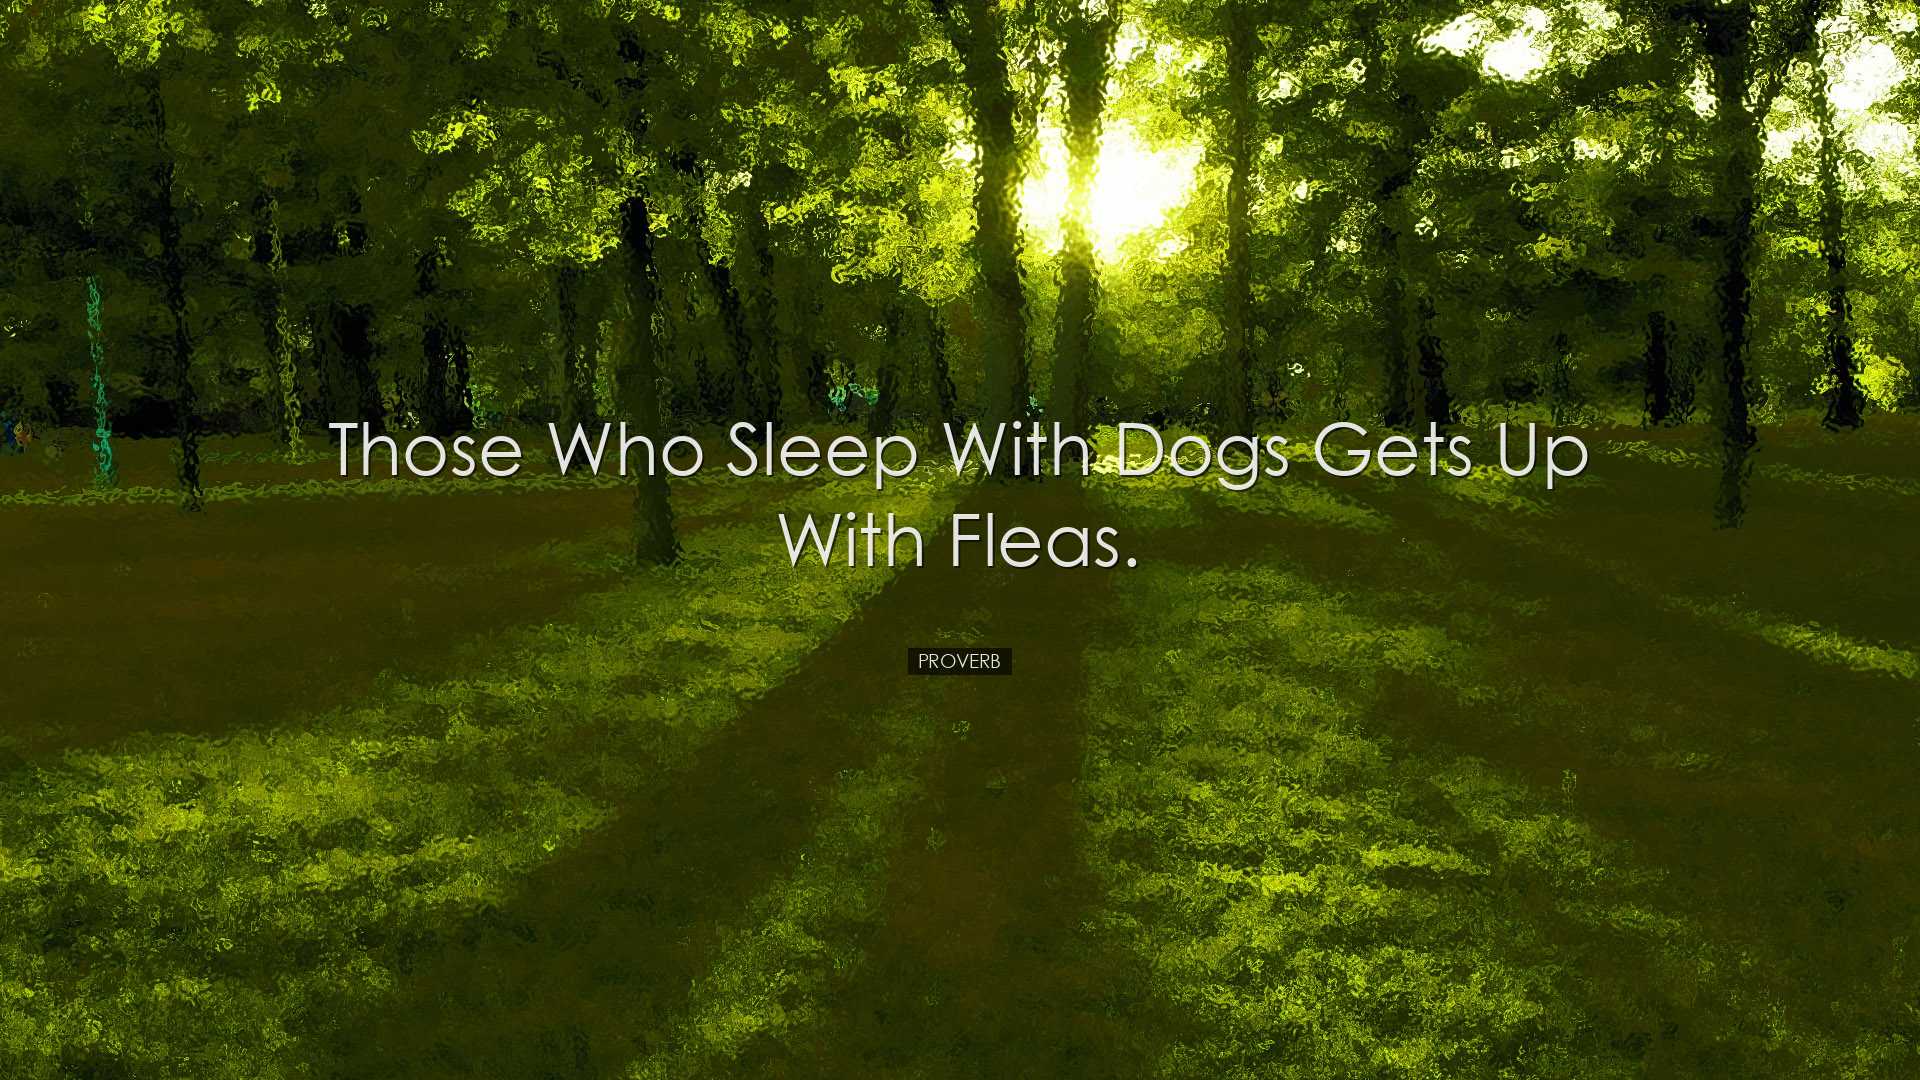 Those who sleep with dogs gets up with fleas. - Proverb